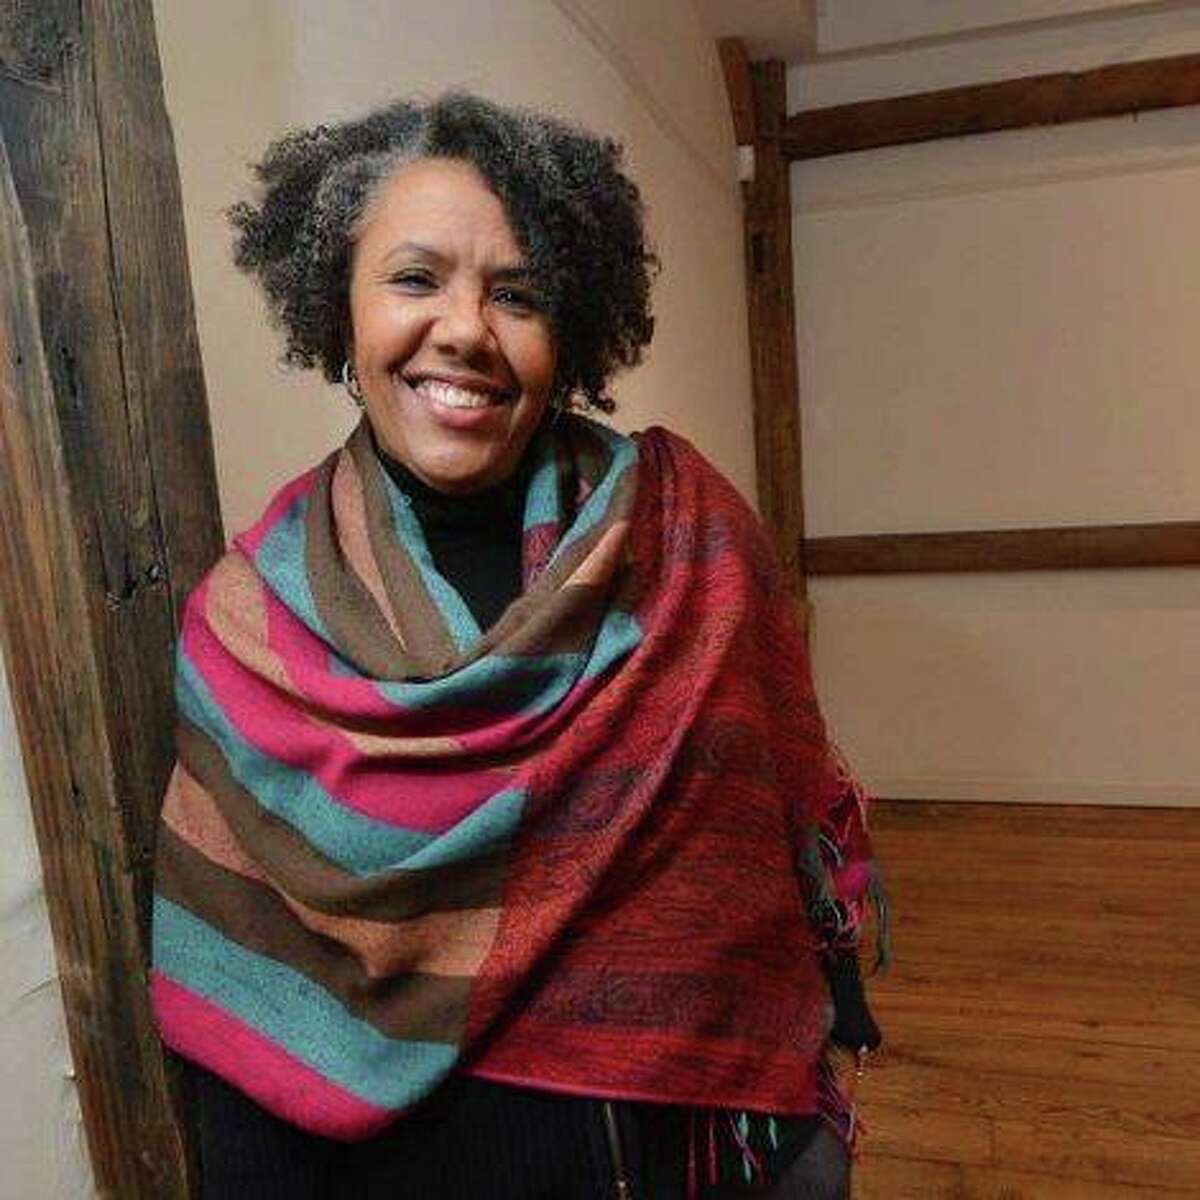 Award-winning creator, actor and singer of “A Journey: Musical One-Woman Show” Kimberly Wilson will tell multiple stories about the Black experience as told by a Black woman at the Ridgefield Library on March 5.